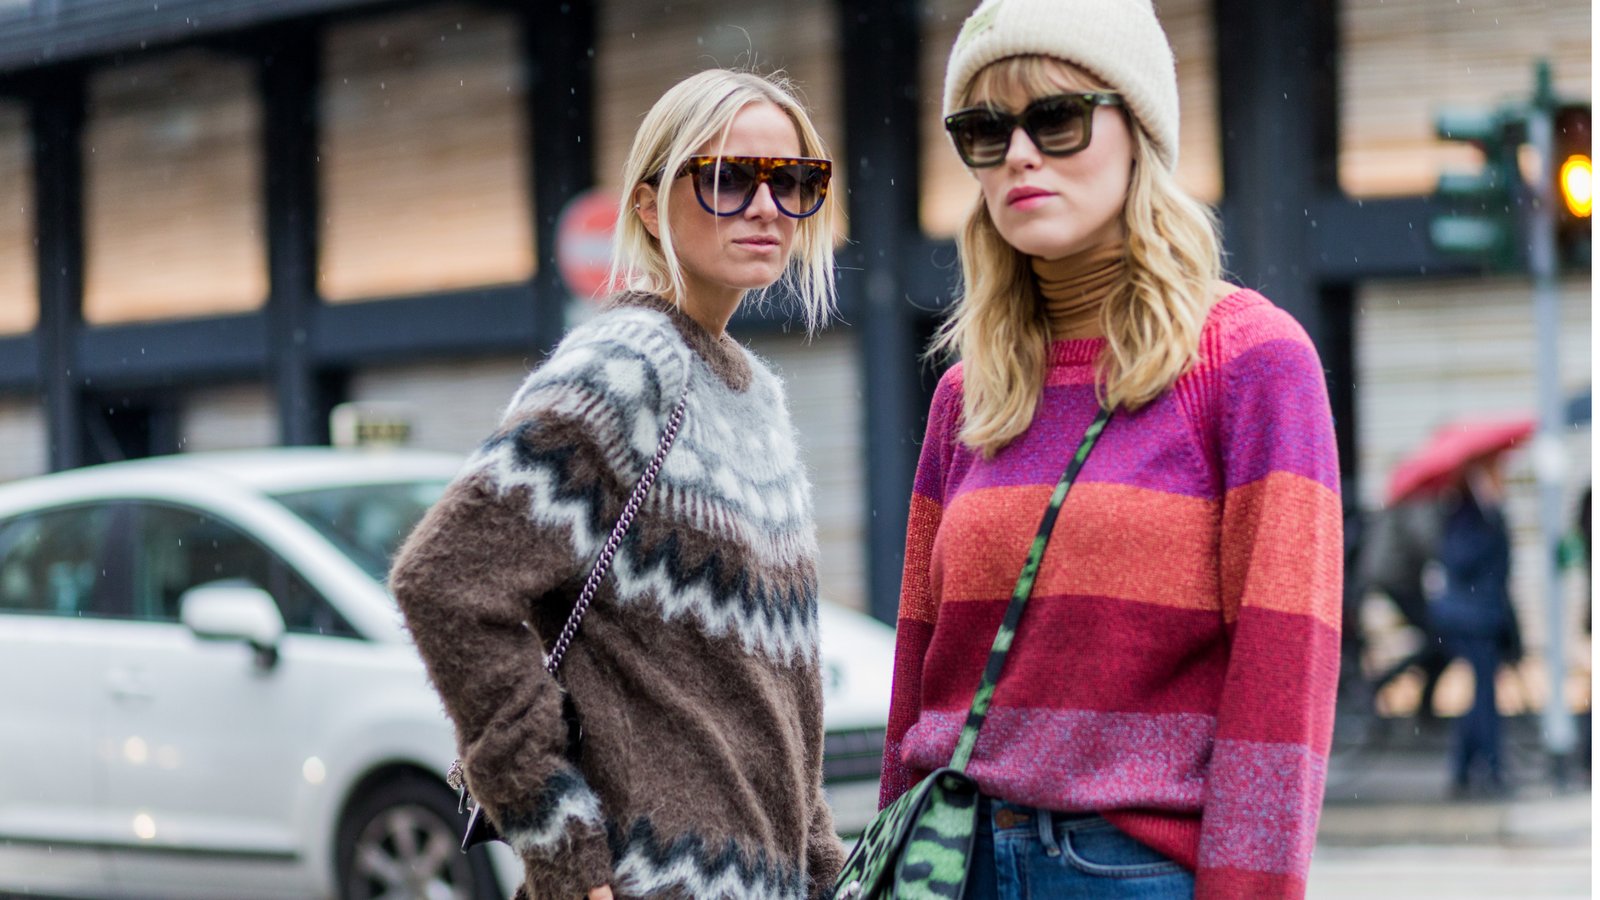 Stylish Women's Sweaters to Keep You Warm This Fall from Knitwear Chic.